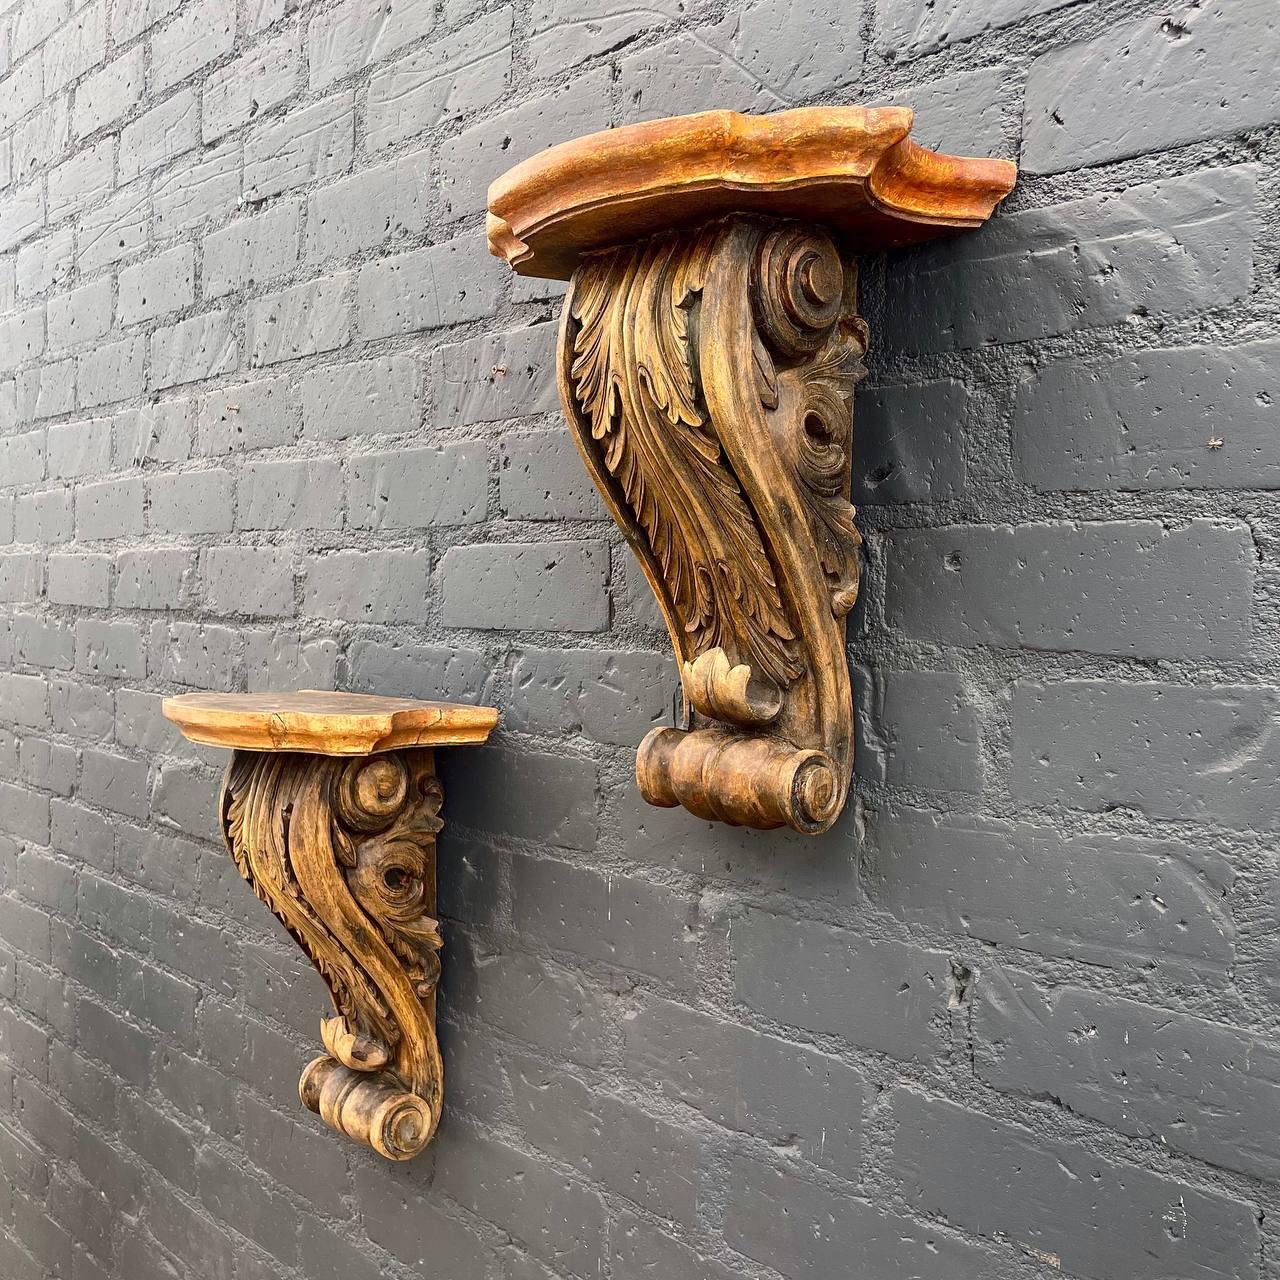 Pair of Classical Italian Painted & Carved Wood Wall Brackets

Country: Italian
Materials: Carved Wood
Condition: Original Condition
Style: Classical Italian
Year: 1940’s

$1,695 pair 

Dimensions:
18.50”H x 16”W x 9.75”D